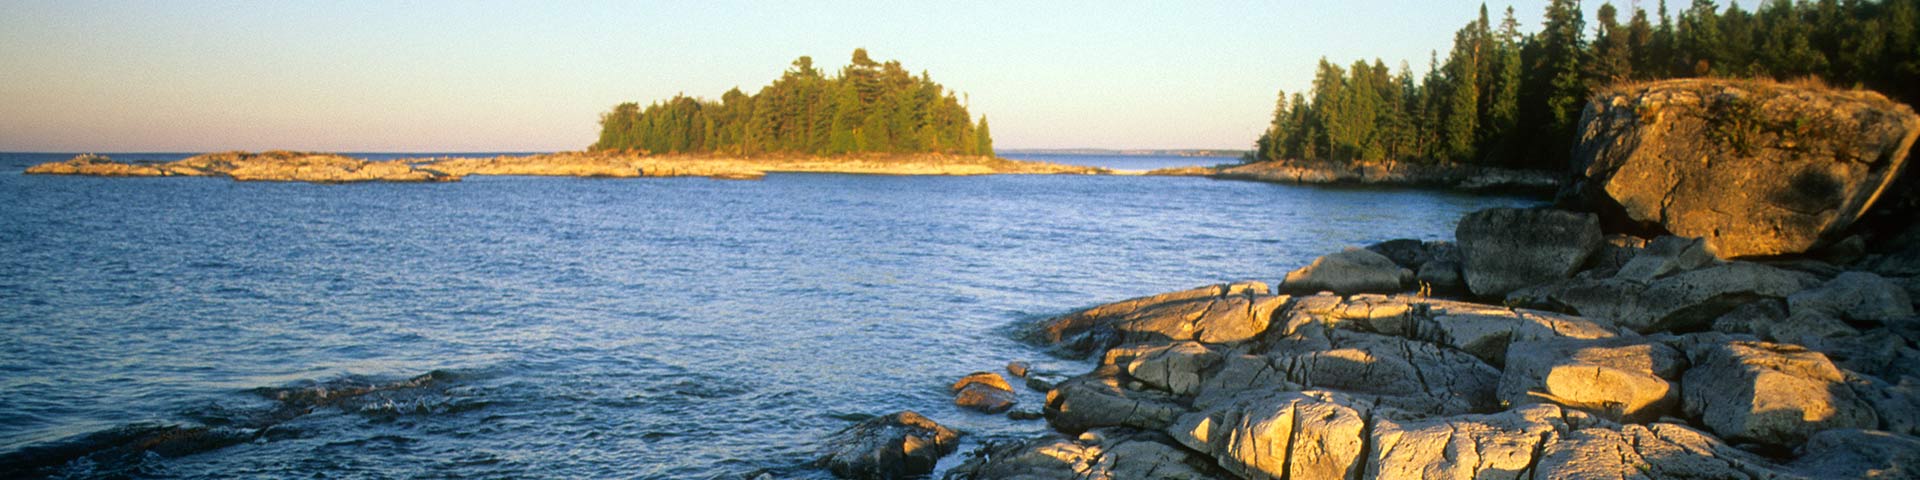 A rocky shoreline with islands in the distance.